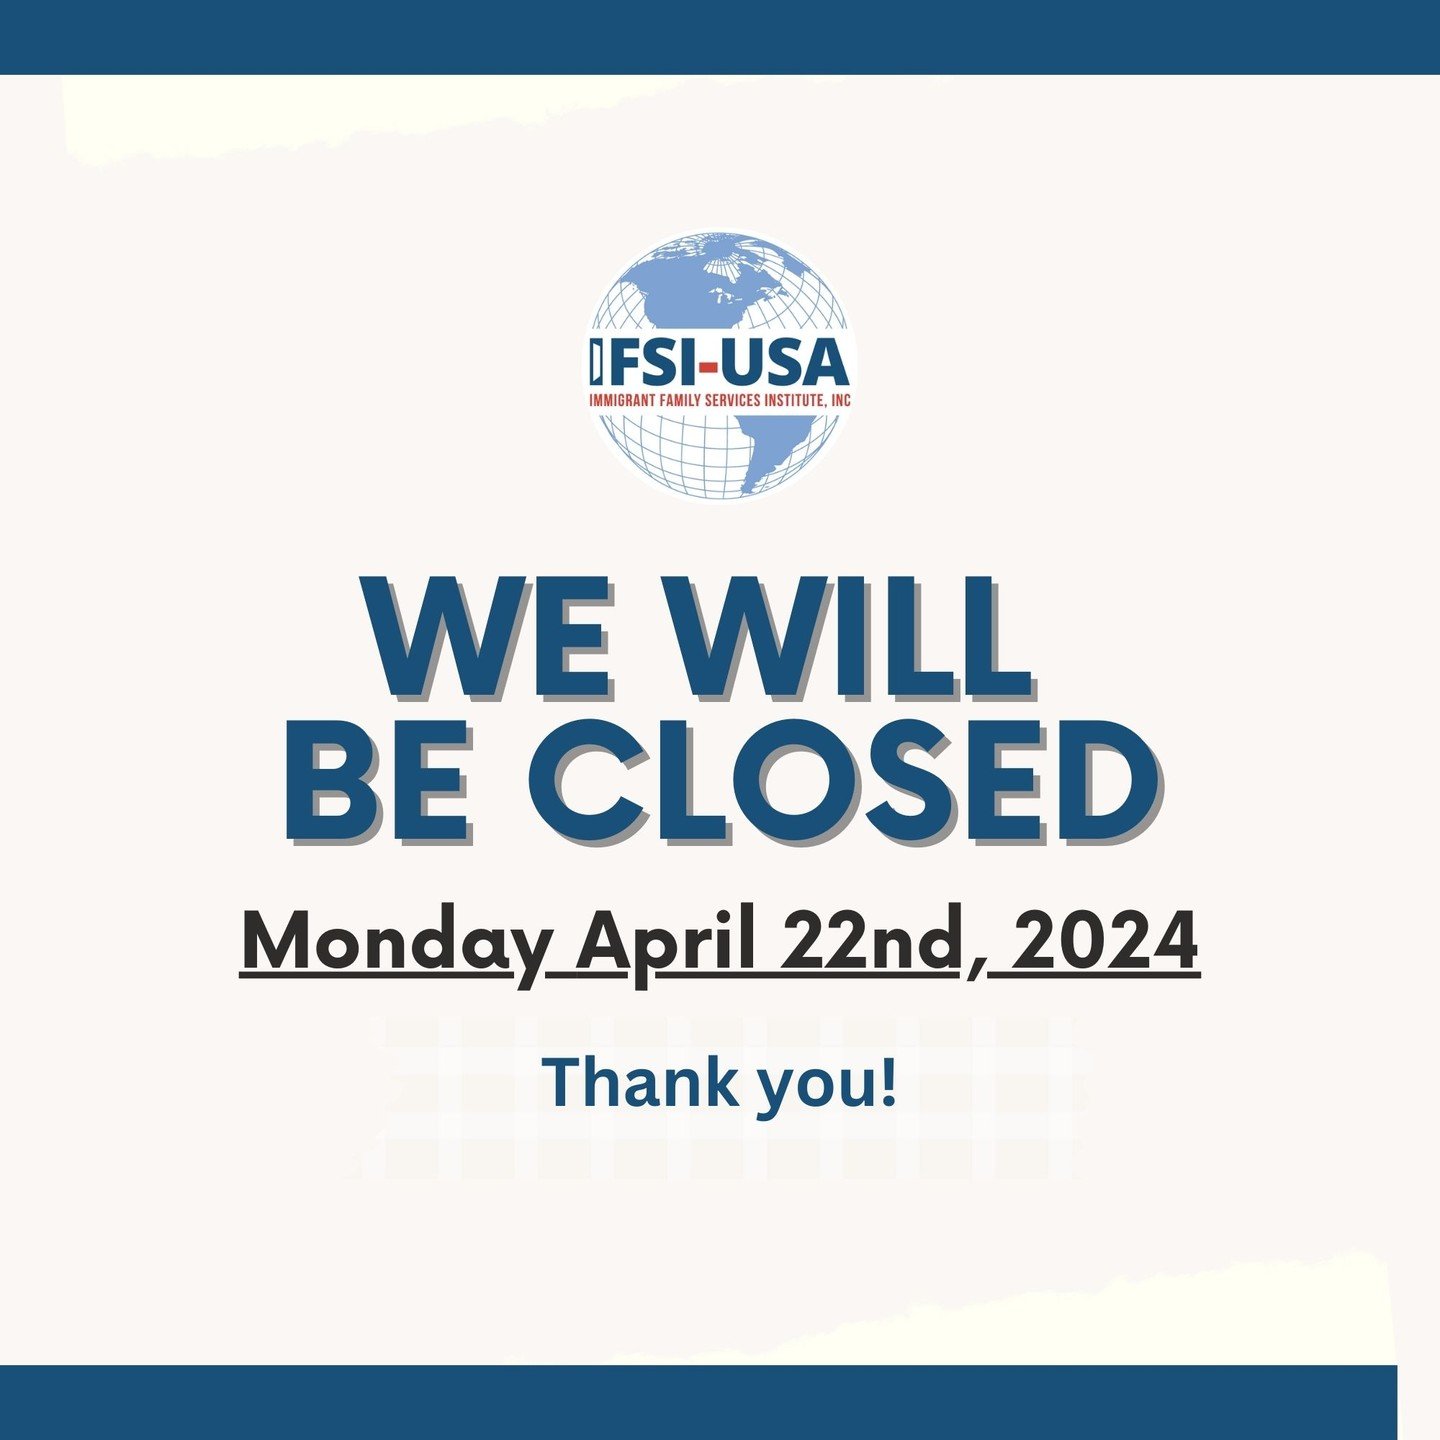 Please be informed that we will be closed on Monday, April 22nd, 2024. We resume normal operations on Tuesday, April 23rd. Thank you for your understanding!